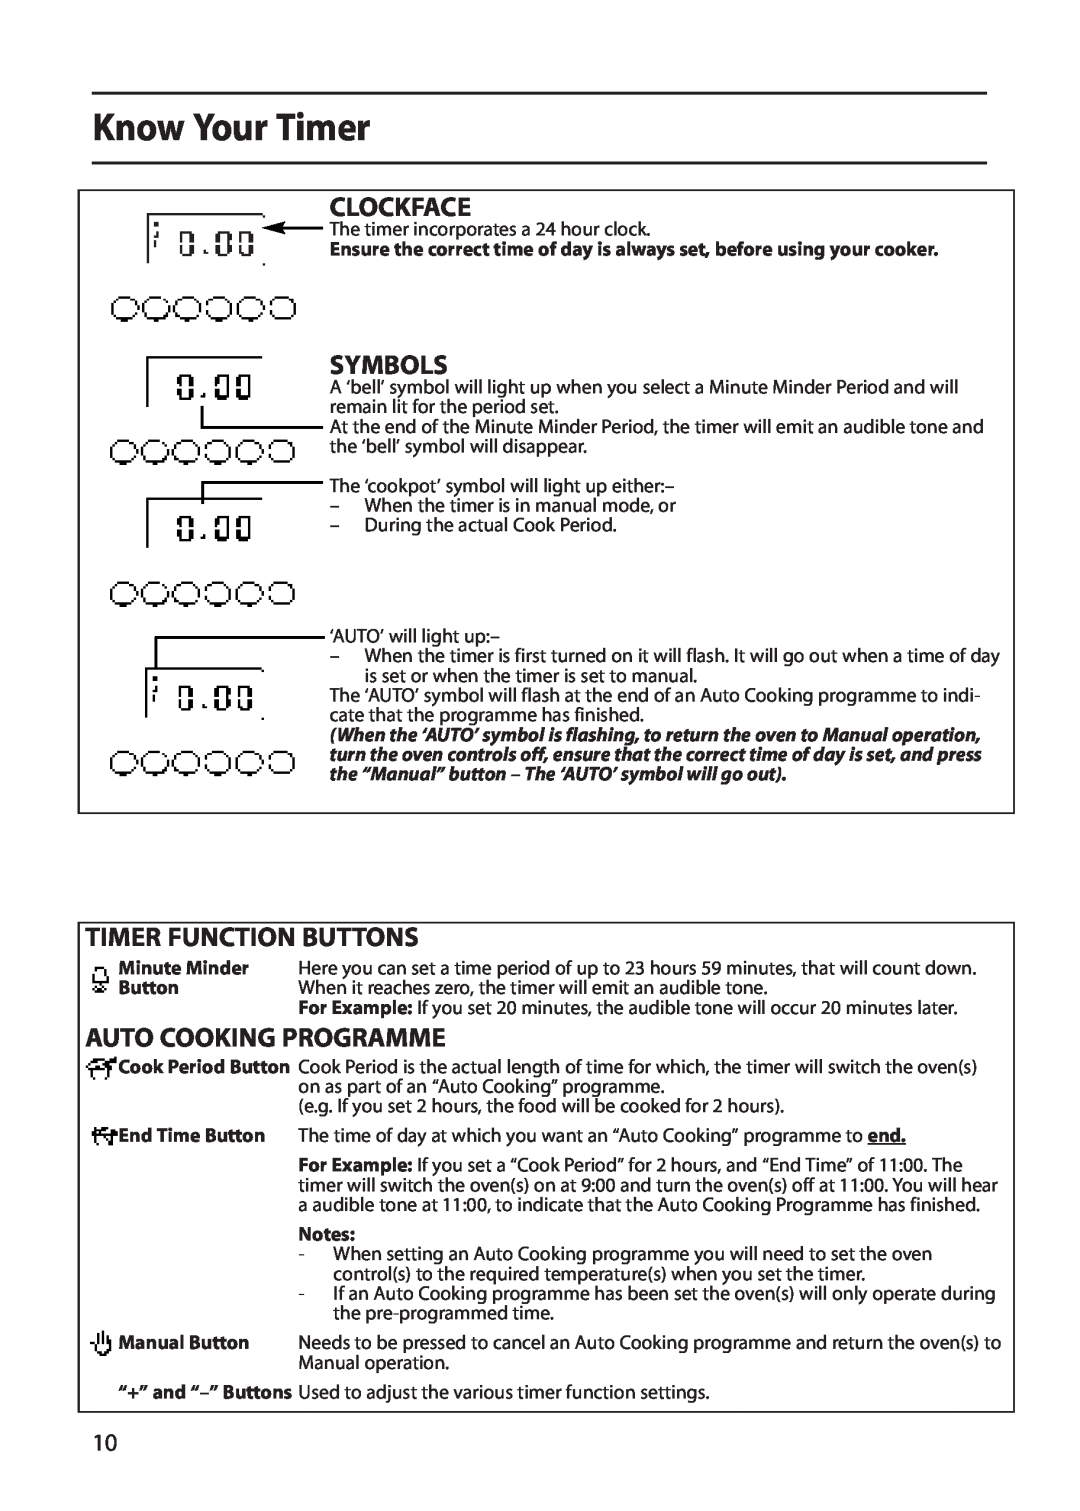 Indesit FDU20 manual Know Your Timer, Clockface, Symbols, Timer Function Buttons, Auto Cooking Programme 